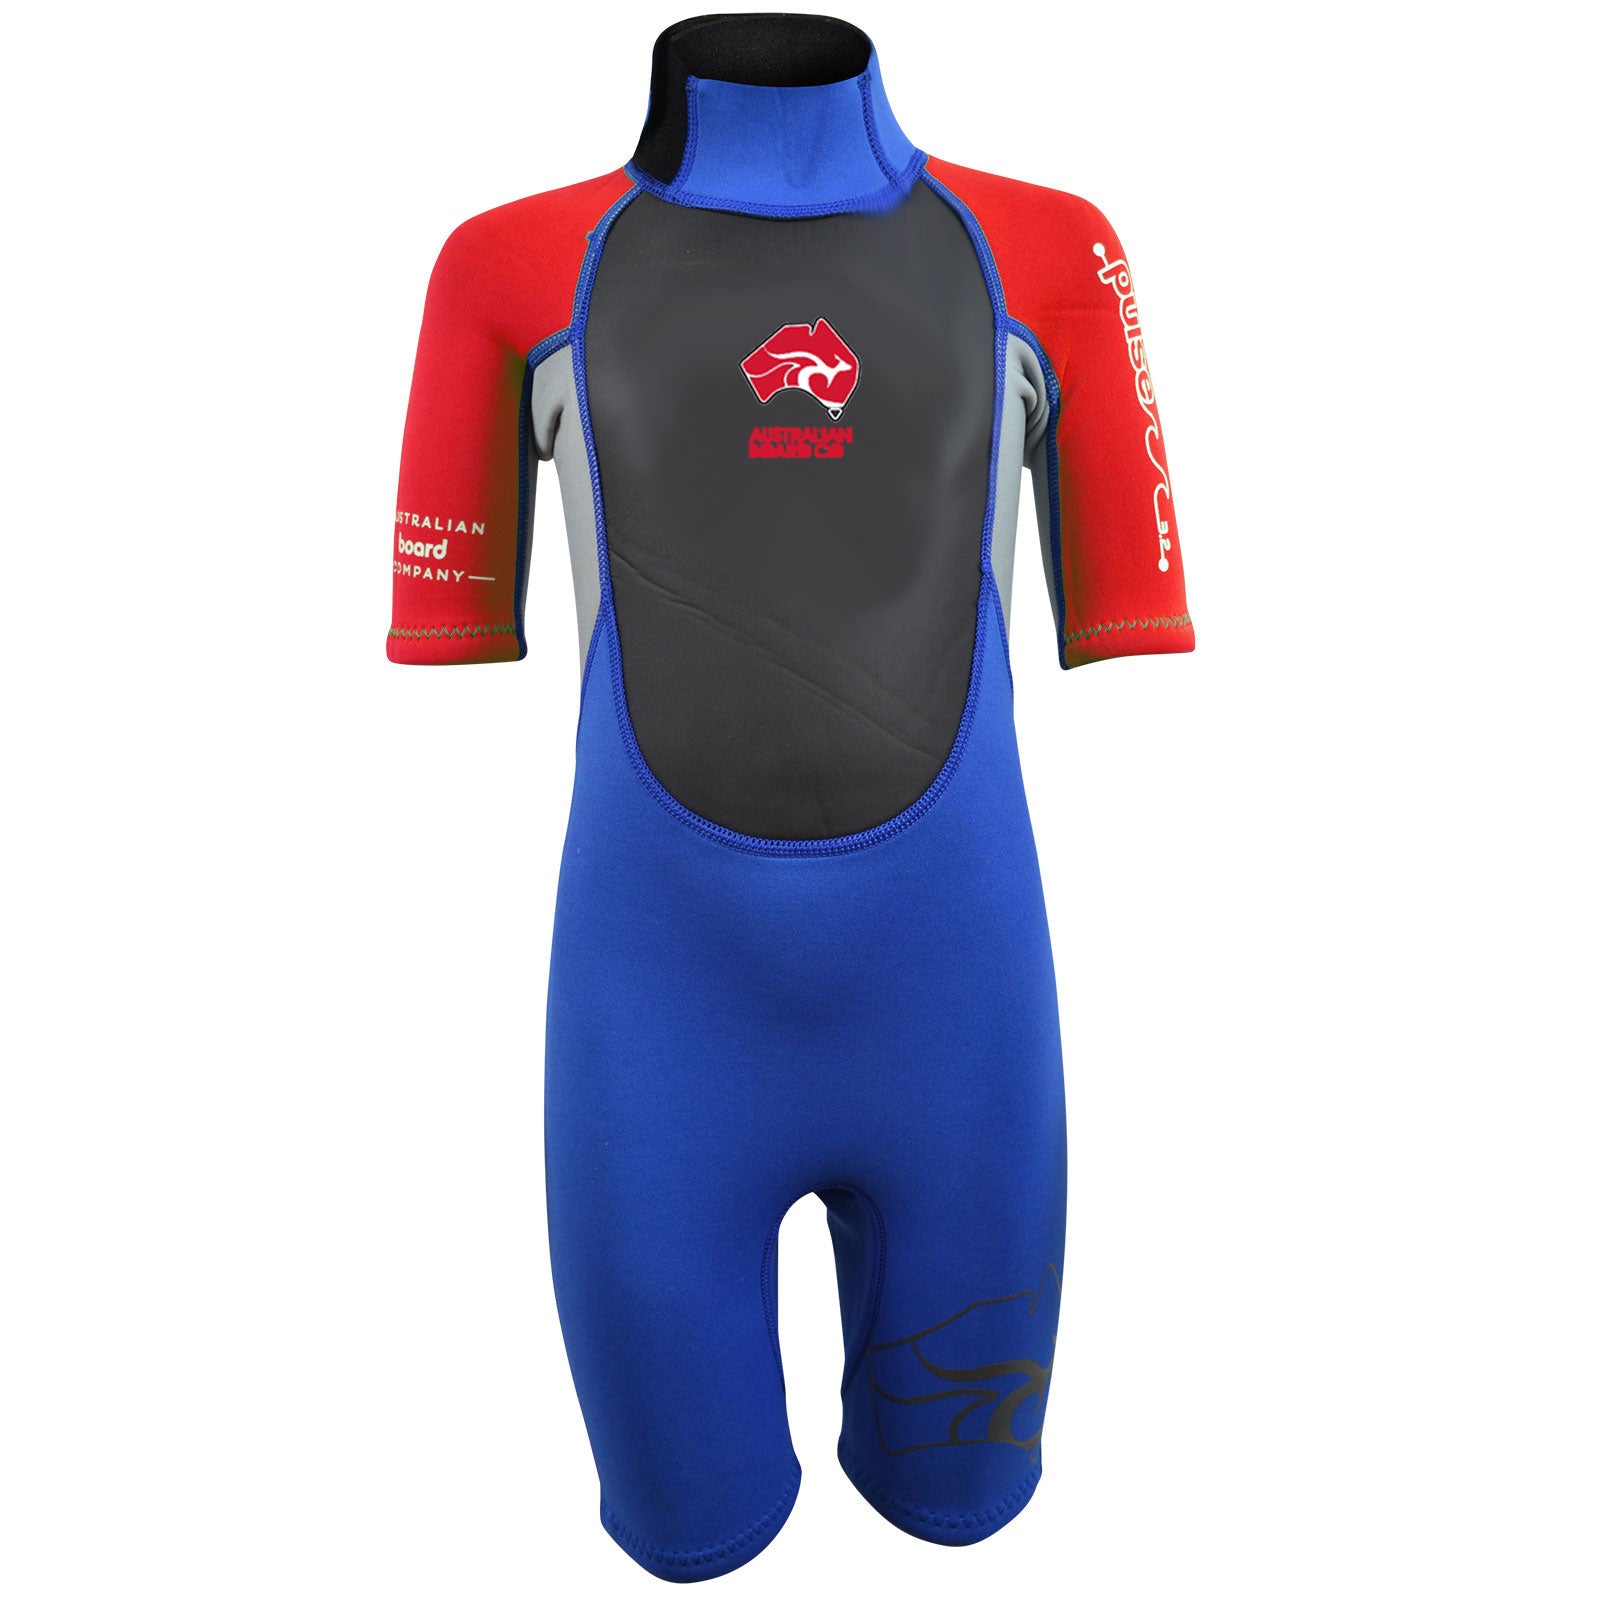 Kids (Toddler) Summer Wetsuit PULSE 3/2mm Shorty | Funky Town Shop 